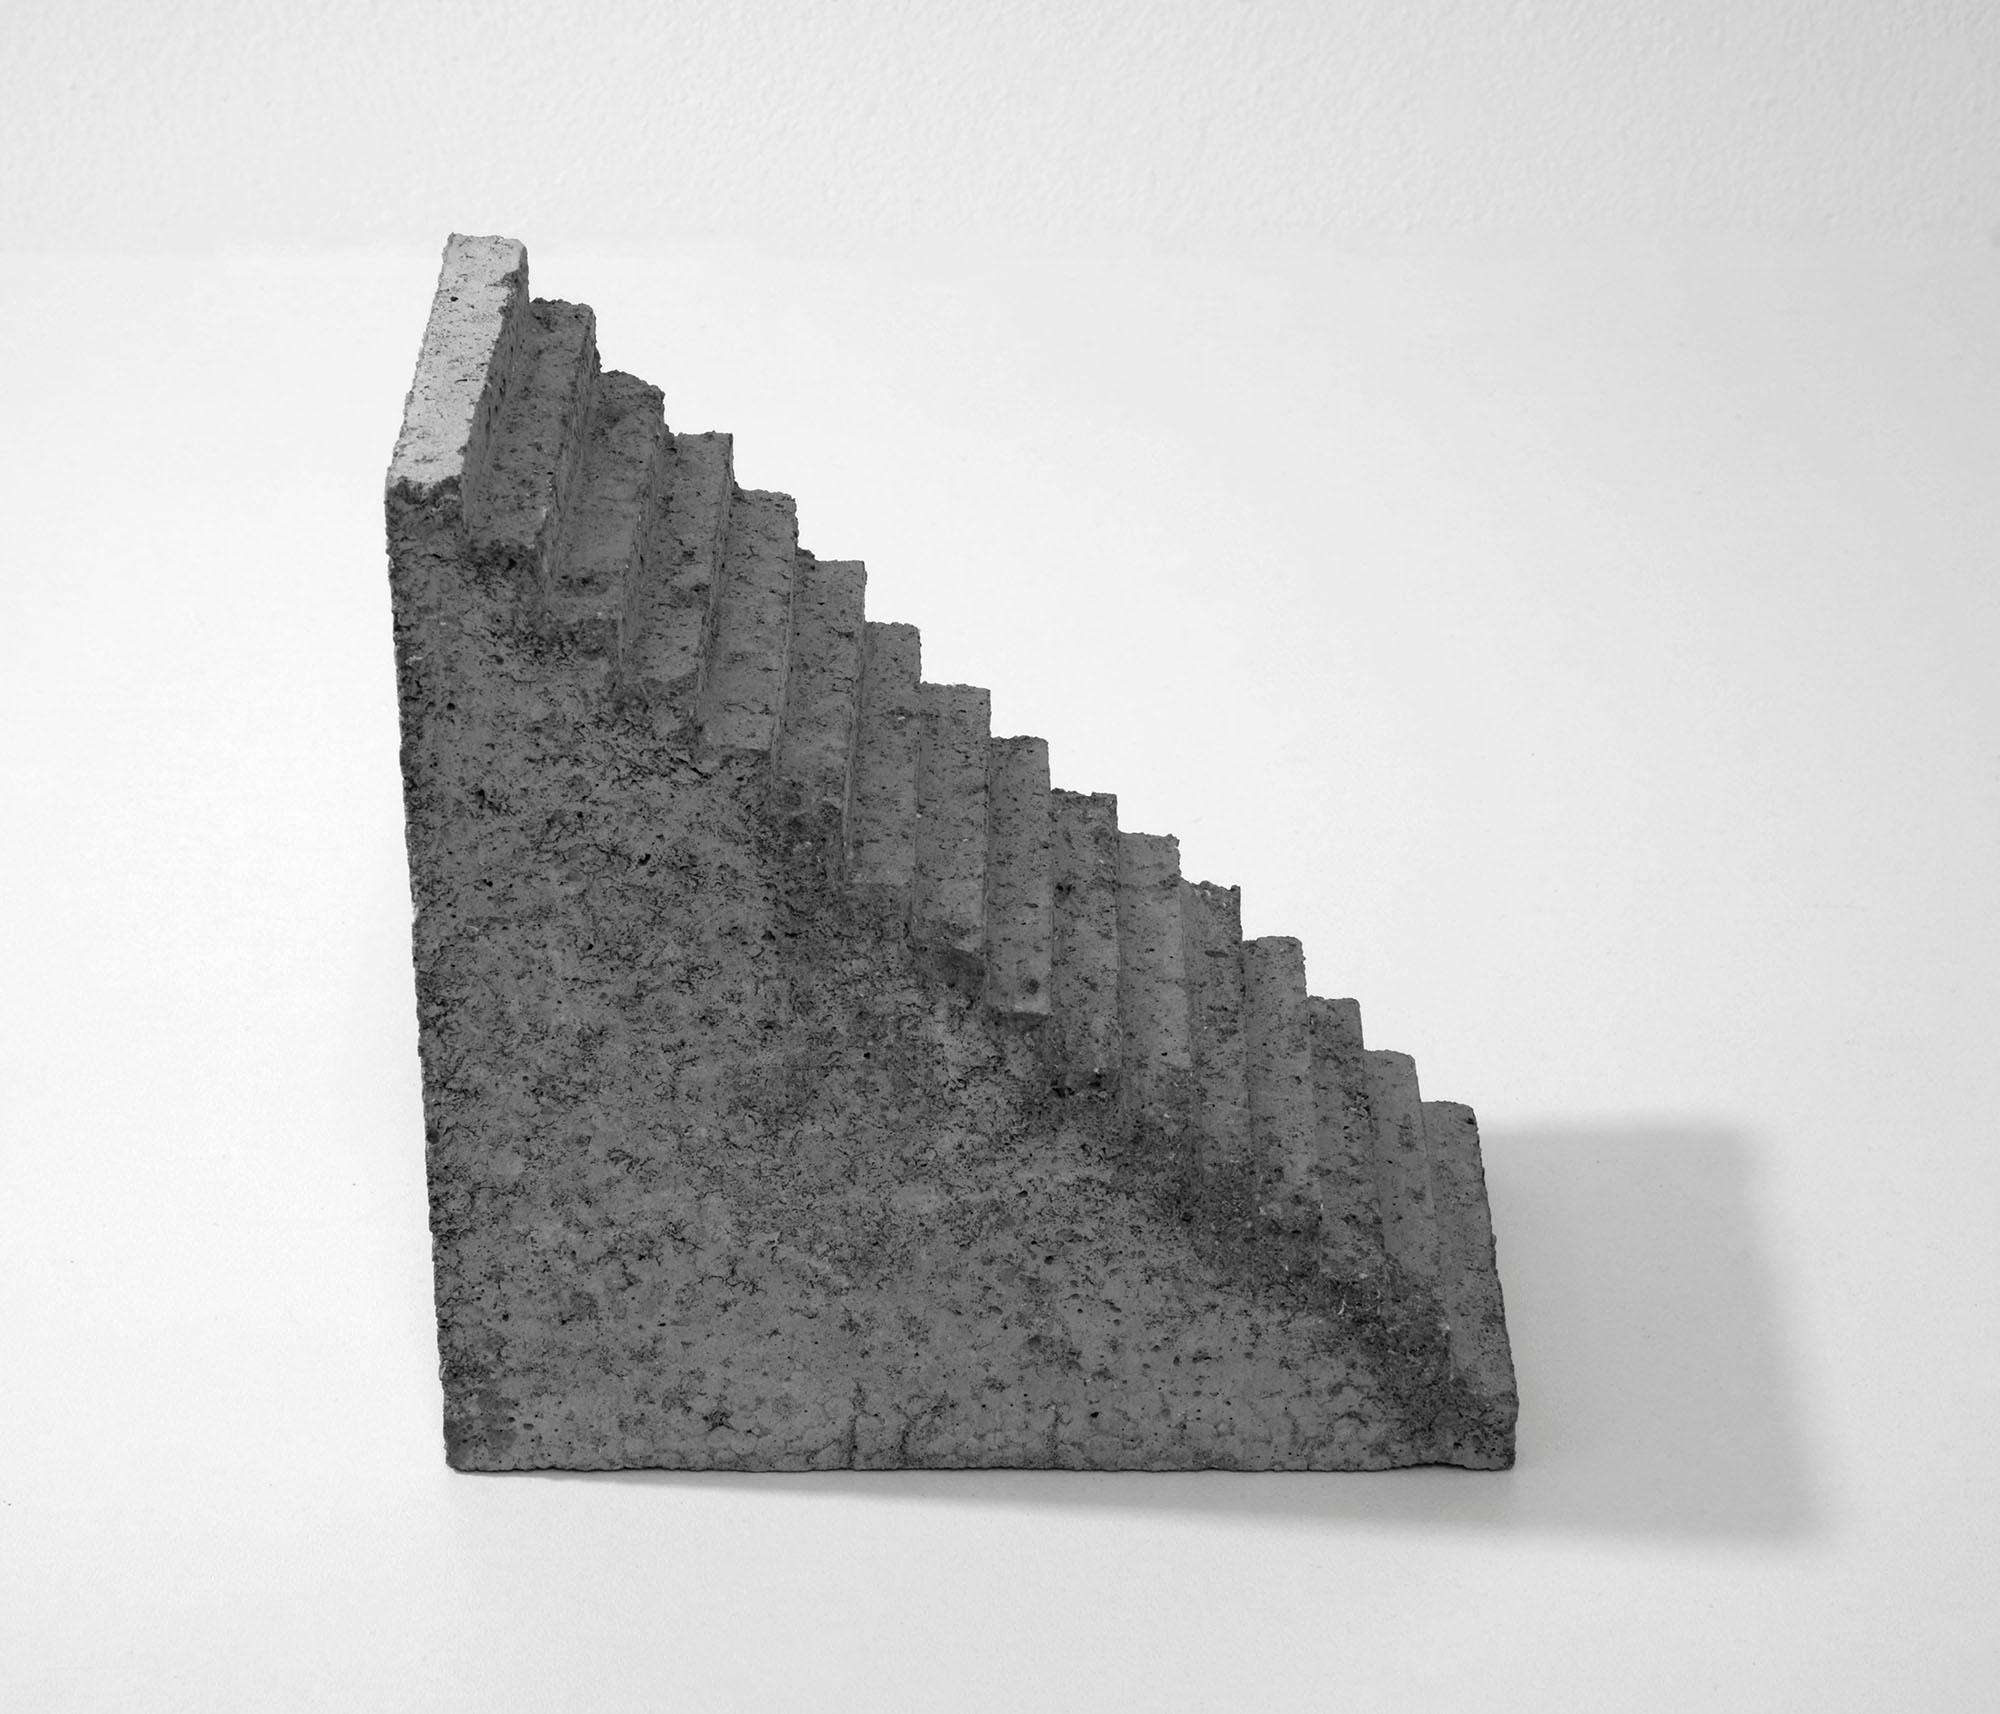 Escalier is a limited edition of 5 concrete sculptures produced by hand - 2019 - 16 x 8 x 16 cm each. 

Mattia Listowski is a french emerging artist born in 1987.
Mattia Listowski’s concrete works are the testimony of a world, of architecture in the